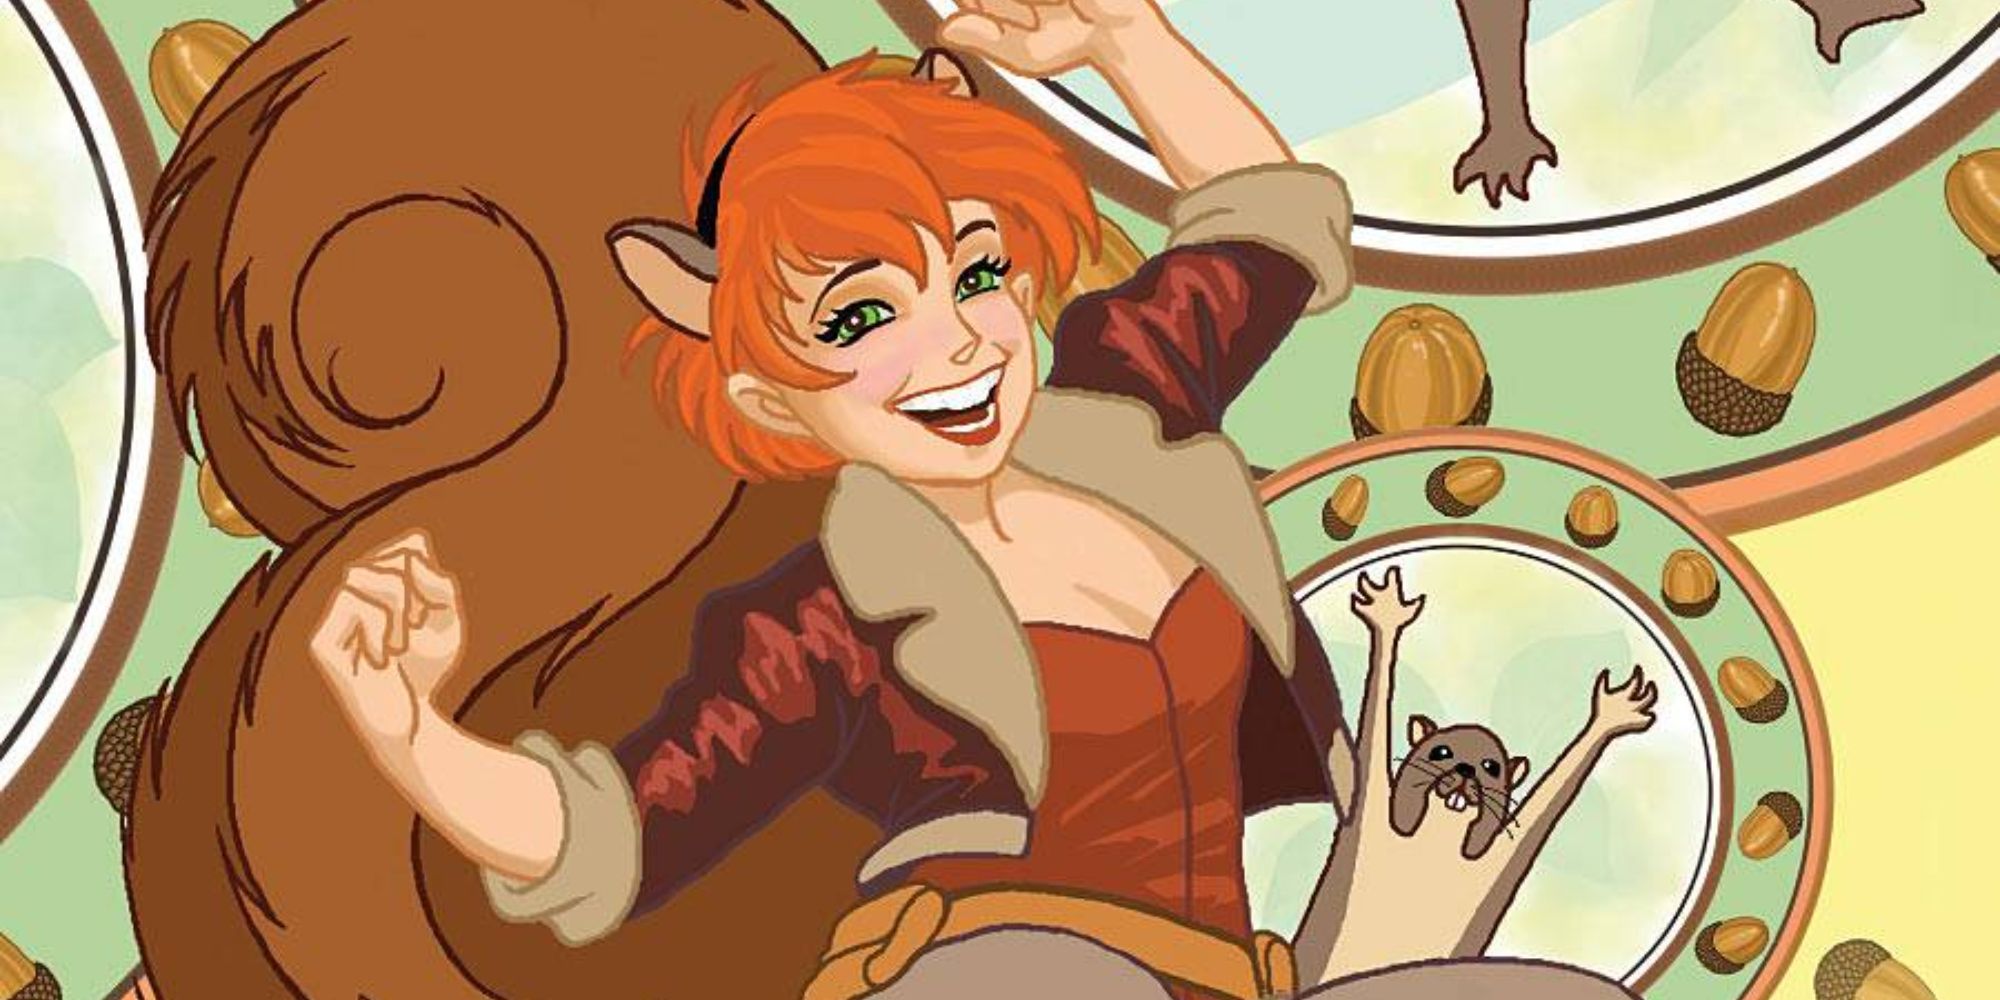 Squirrel Girl with a squirrel in a comic cover